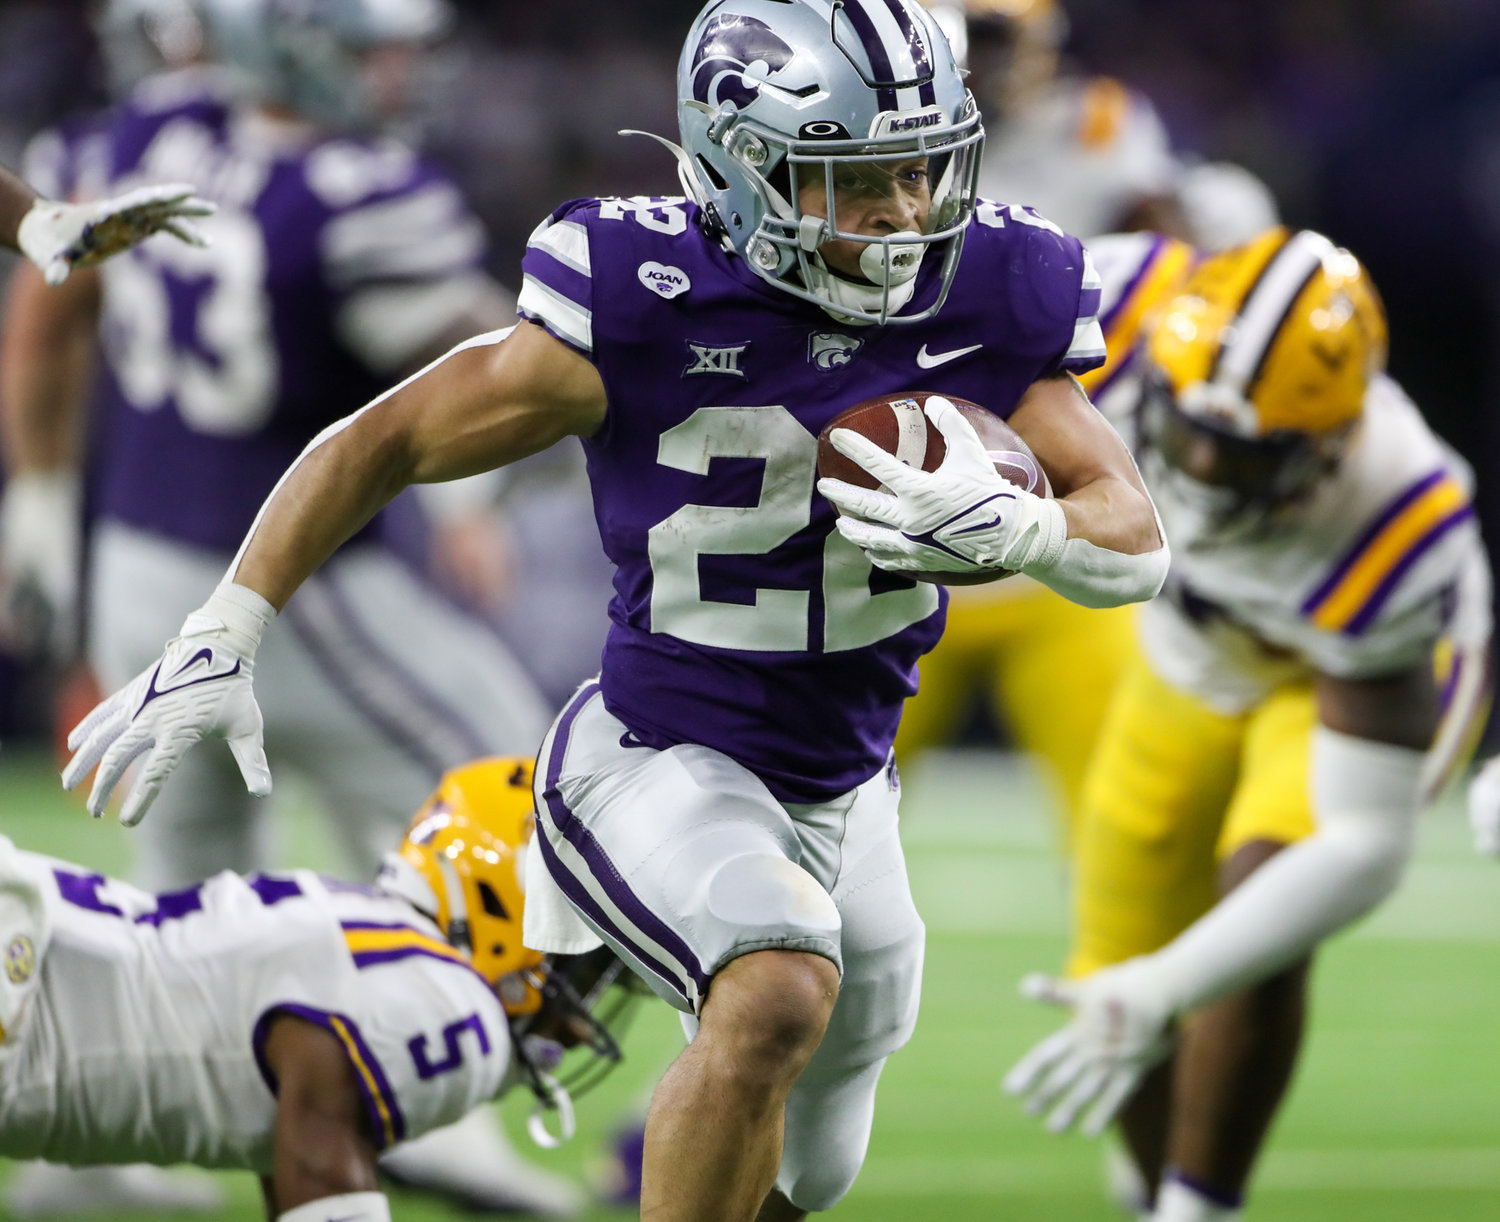 Kansas State Wildcats running back Deuce Vaughn (22) carries the ball for a touchdown during the TaxAct Texas Bowl on Jan. 4, 2022 in Houston, Texas.